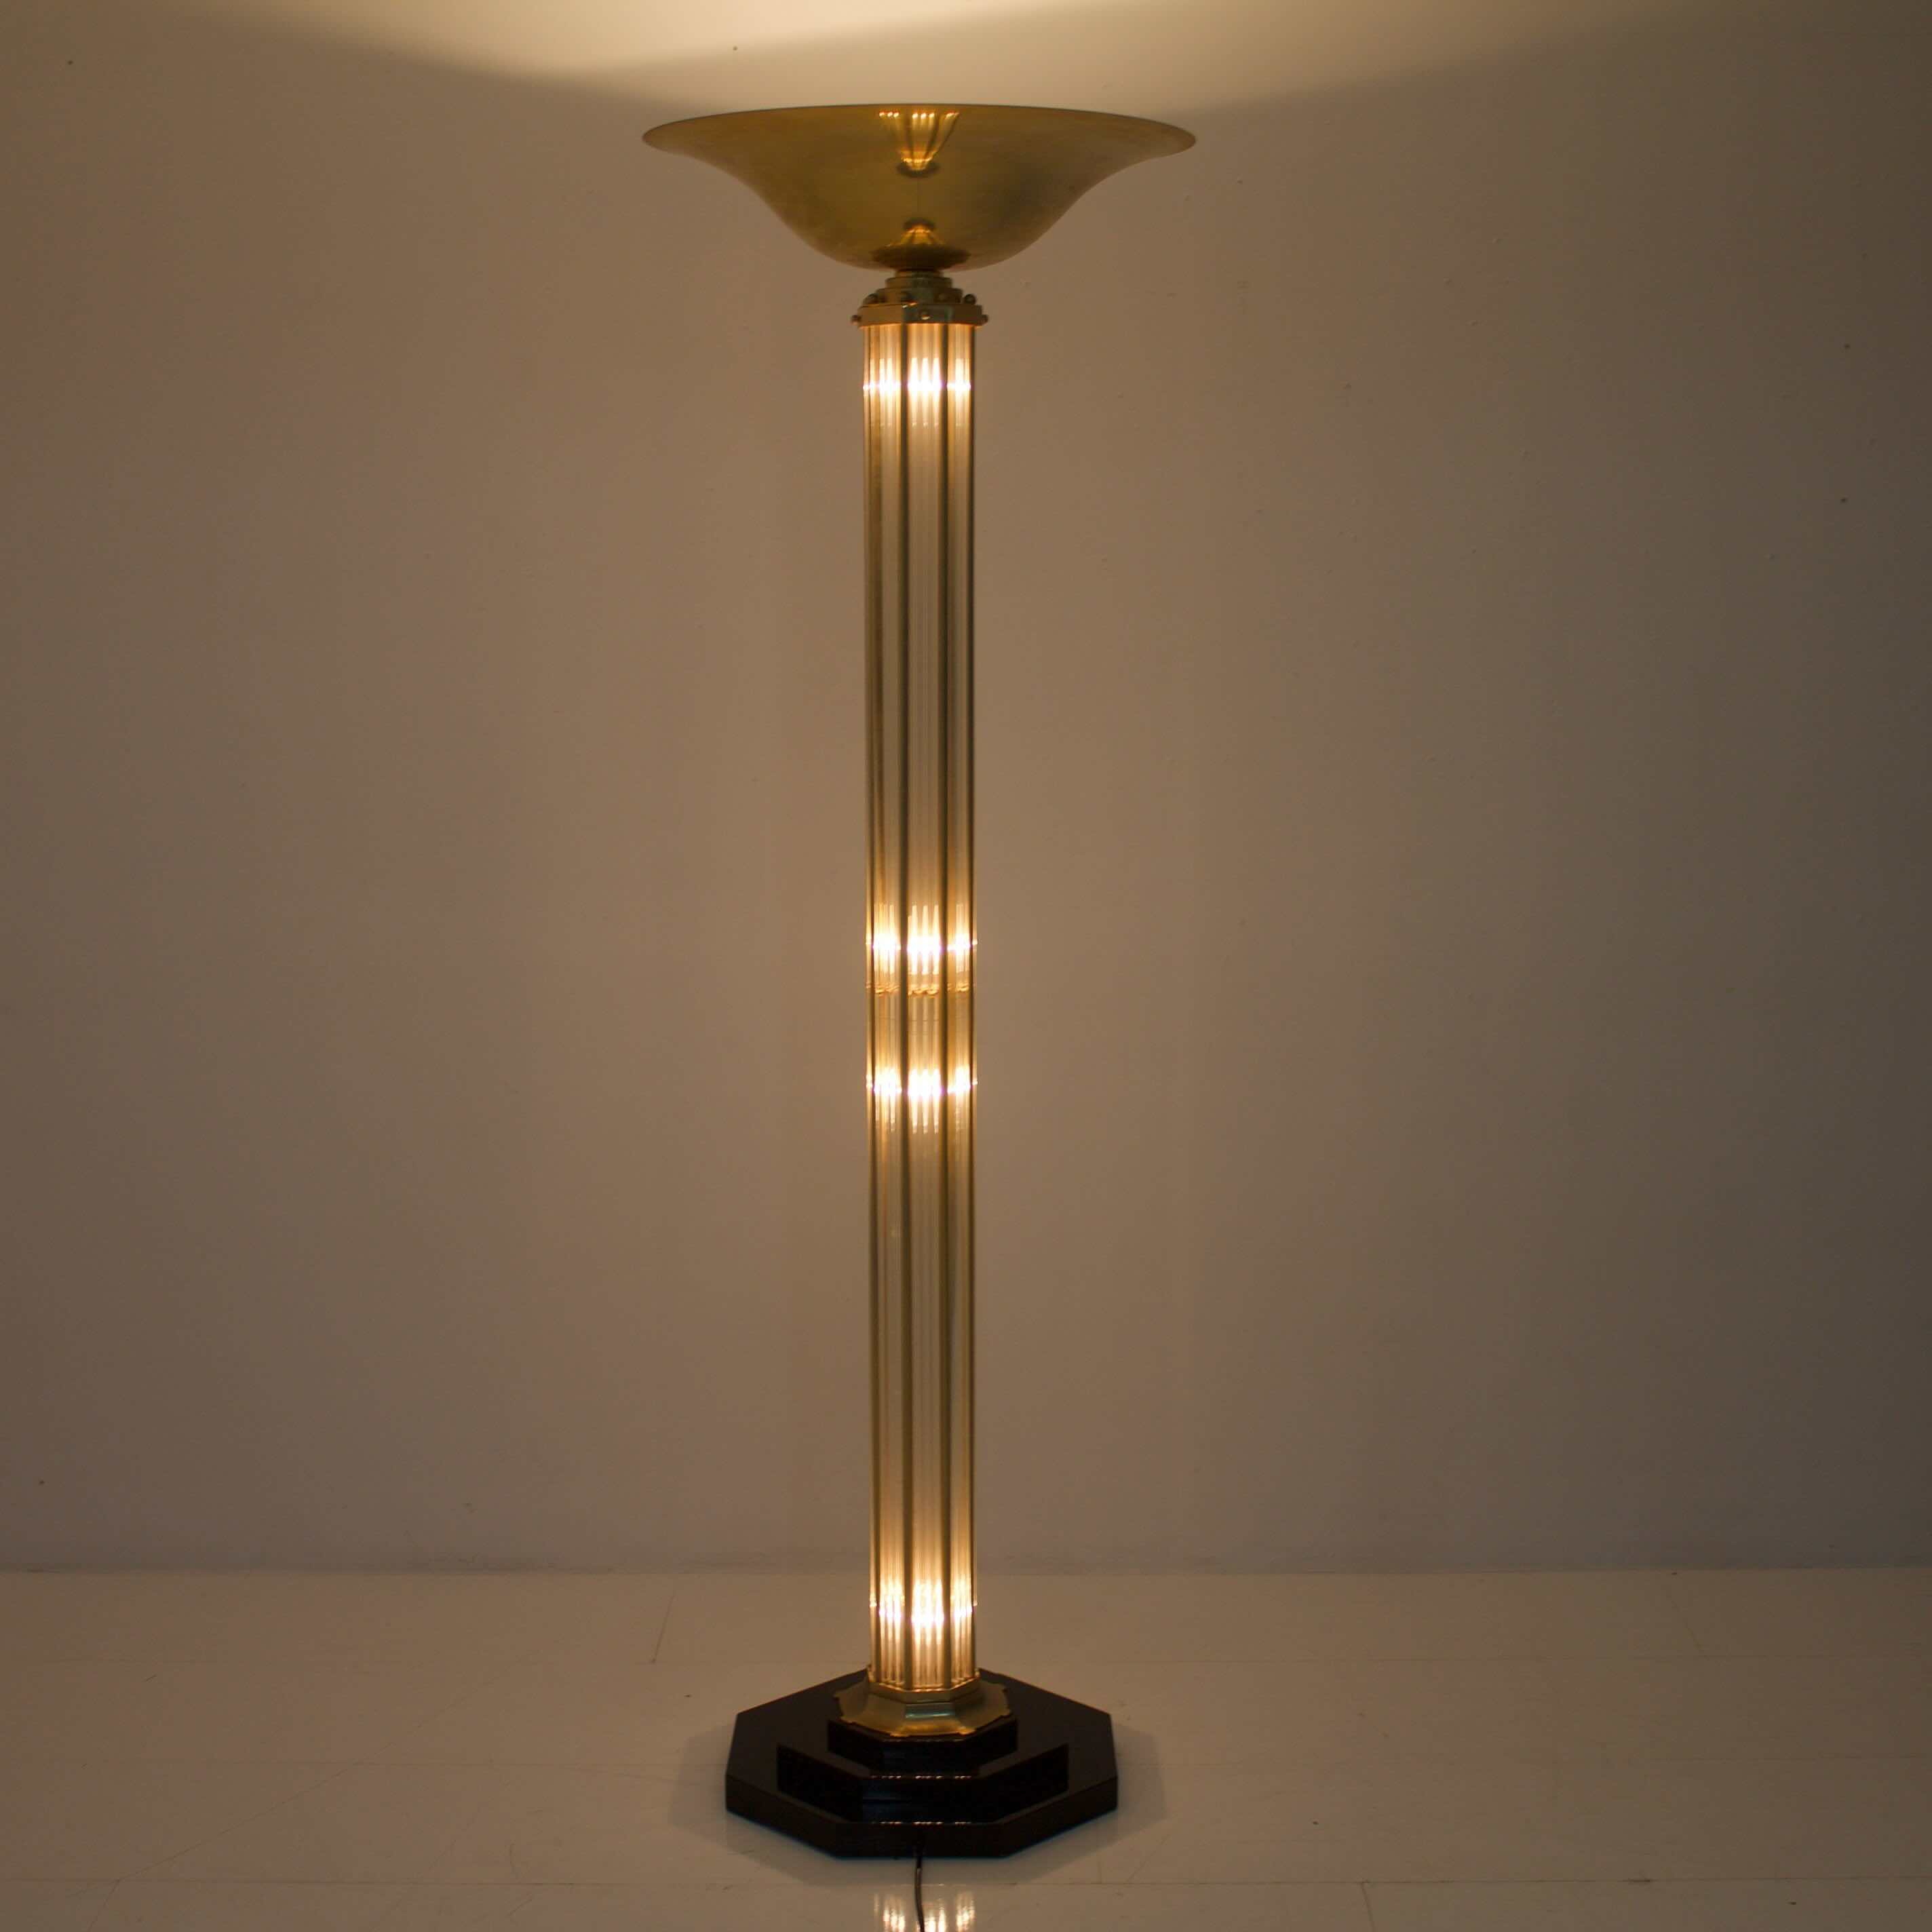 What Is A Torchiere Floor Lamp